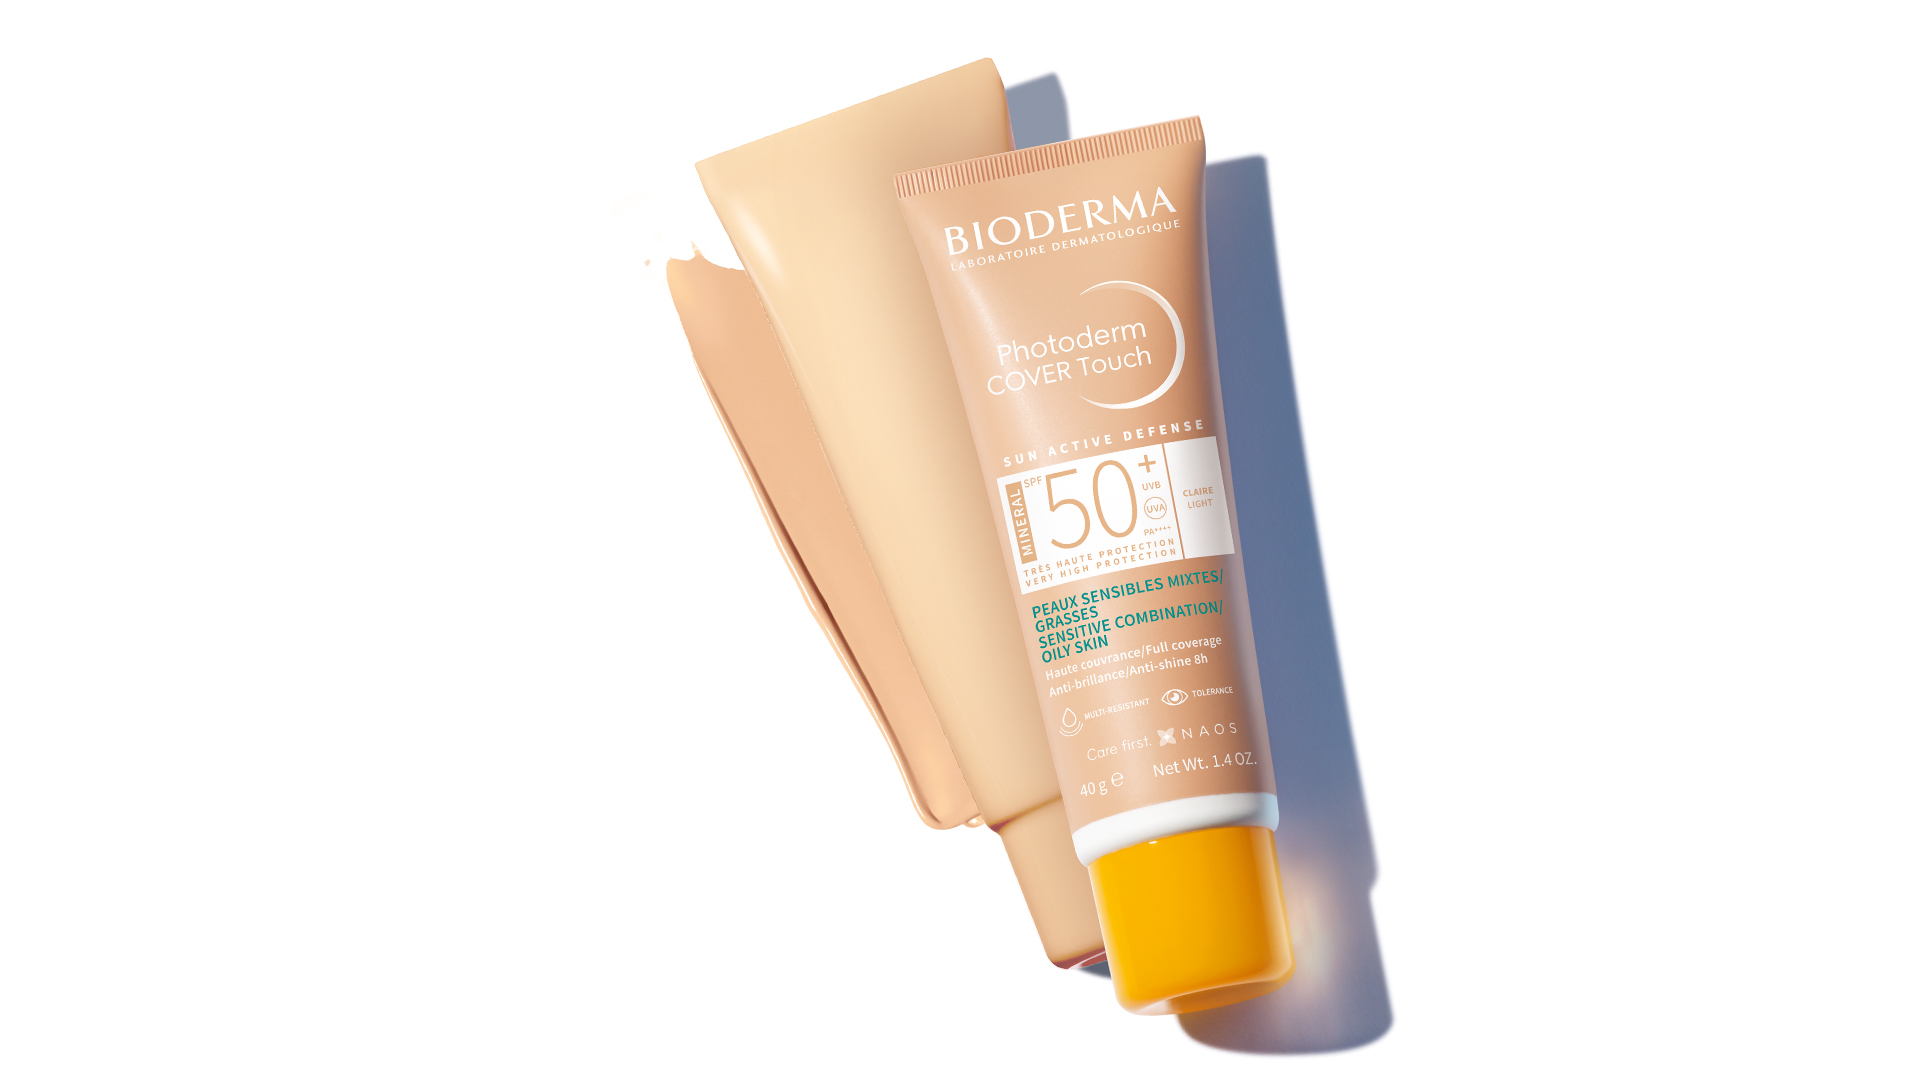 Photoderm Cover Touch SPF 50+